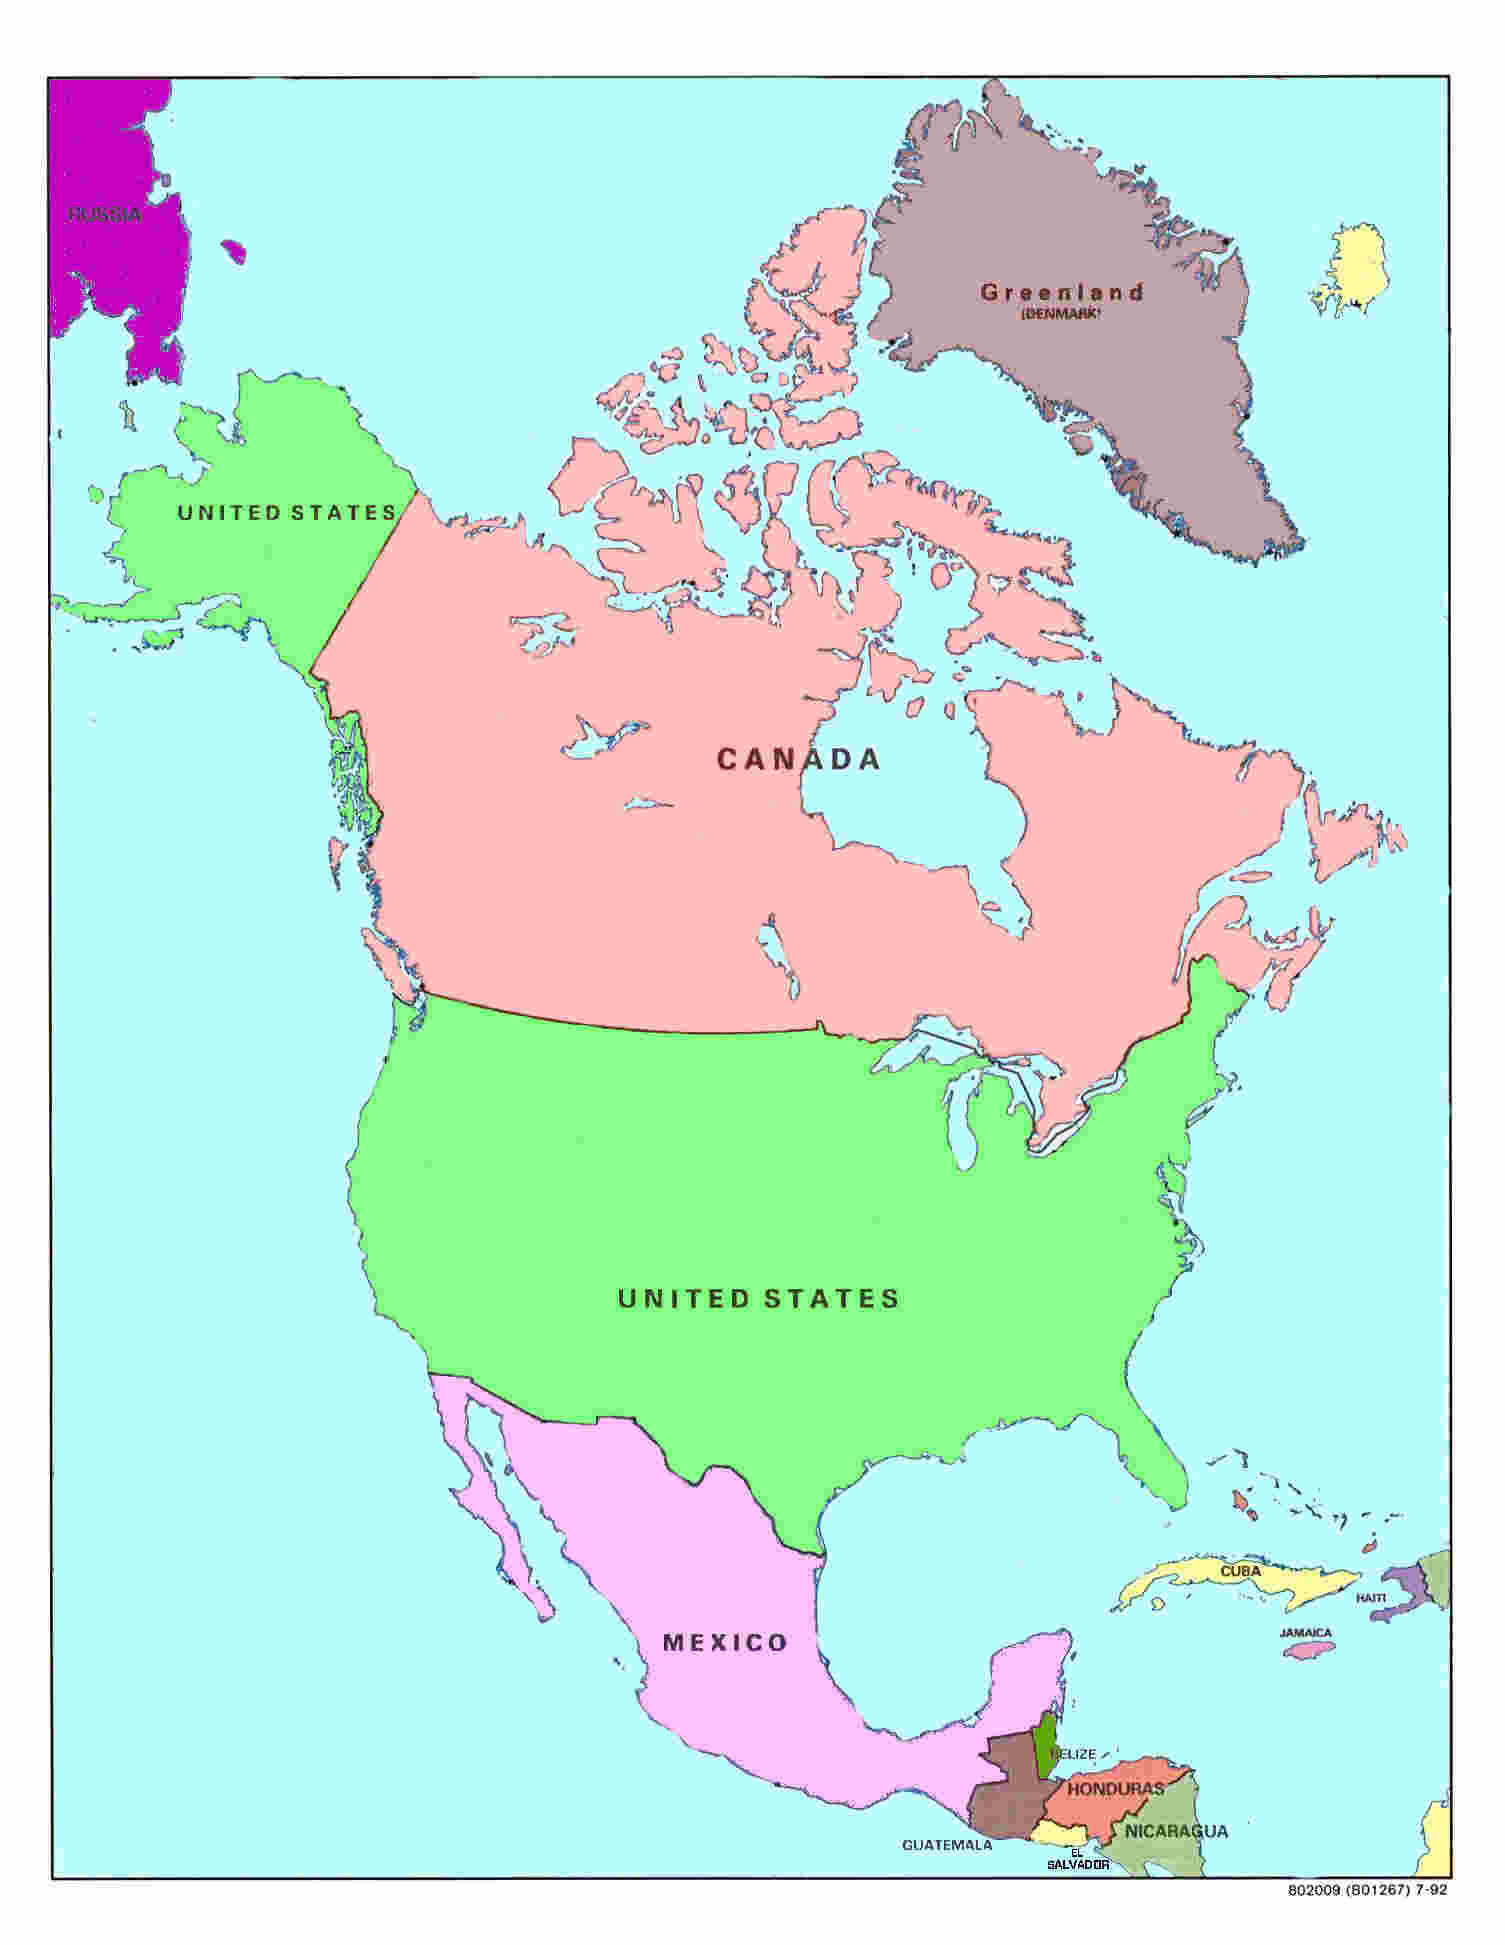 north american countries and capitals list